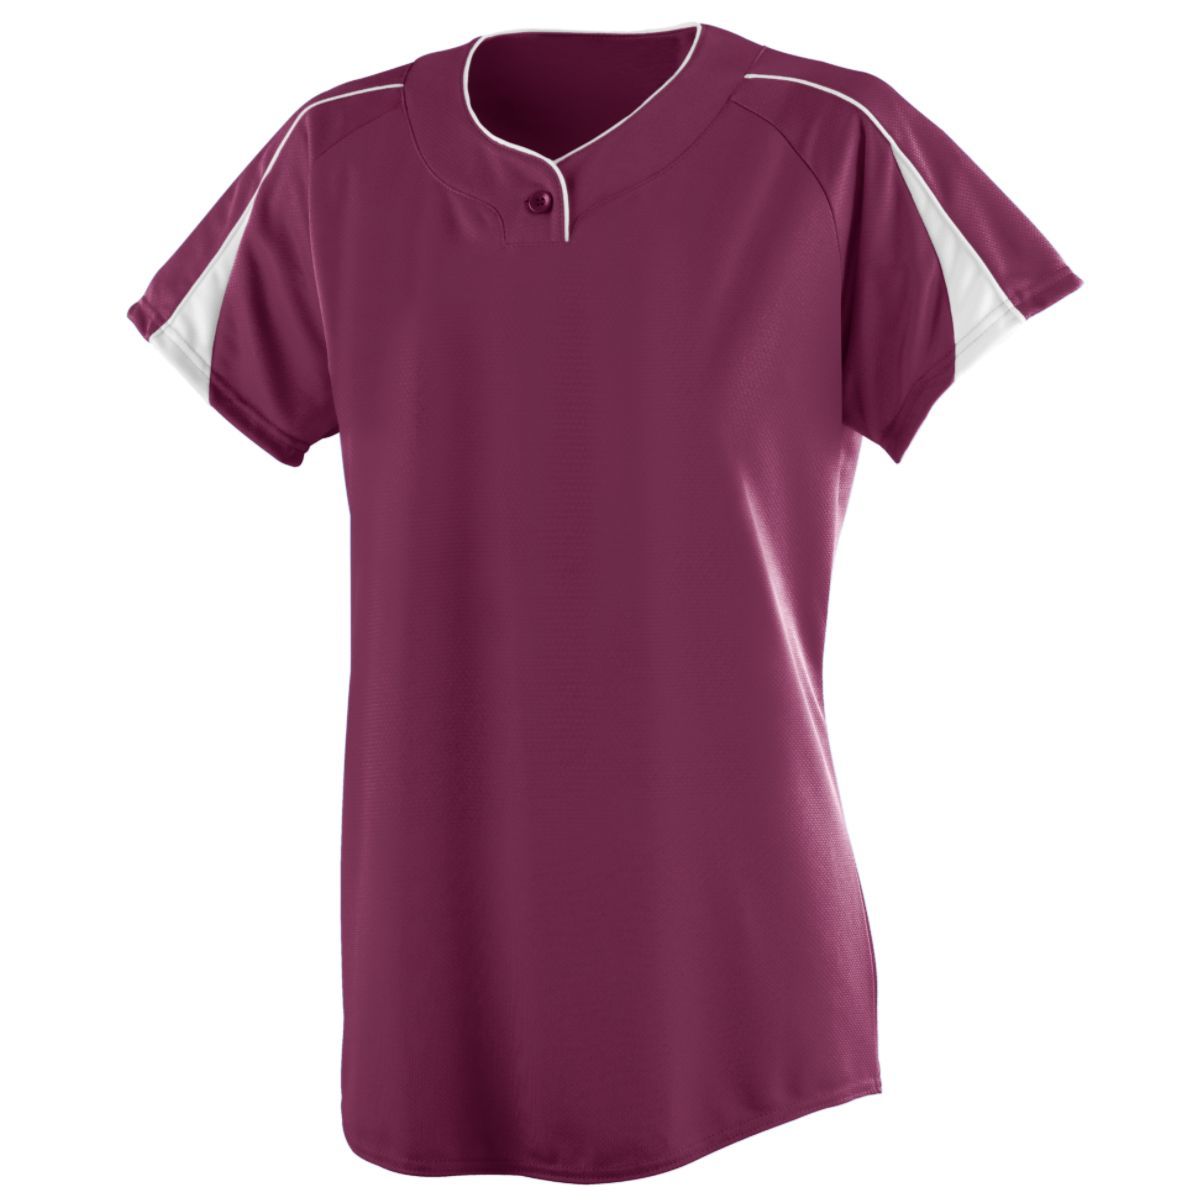 Augusta Sportswear Ladies Diamond Jersey in Maroon/White  -Part of the Ladies, Ladies-Jersey, Augusta-Products, Softball, Shirts product lines at KanaleyCreations.com